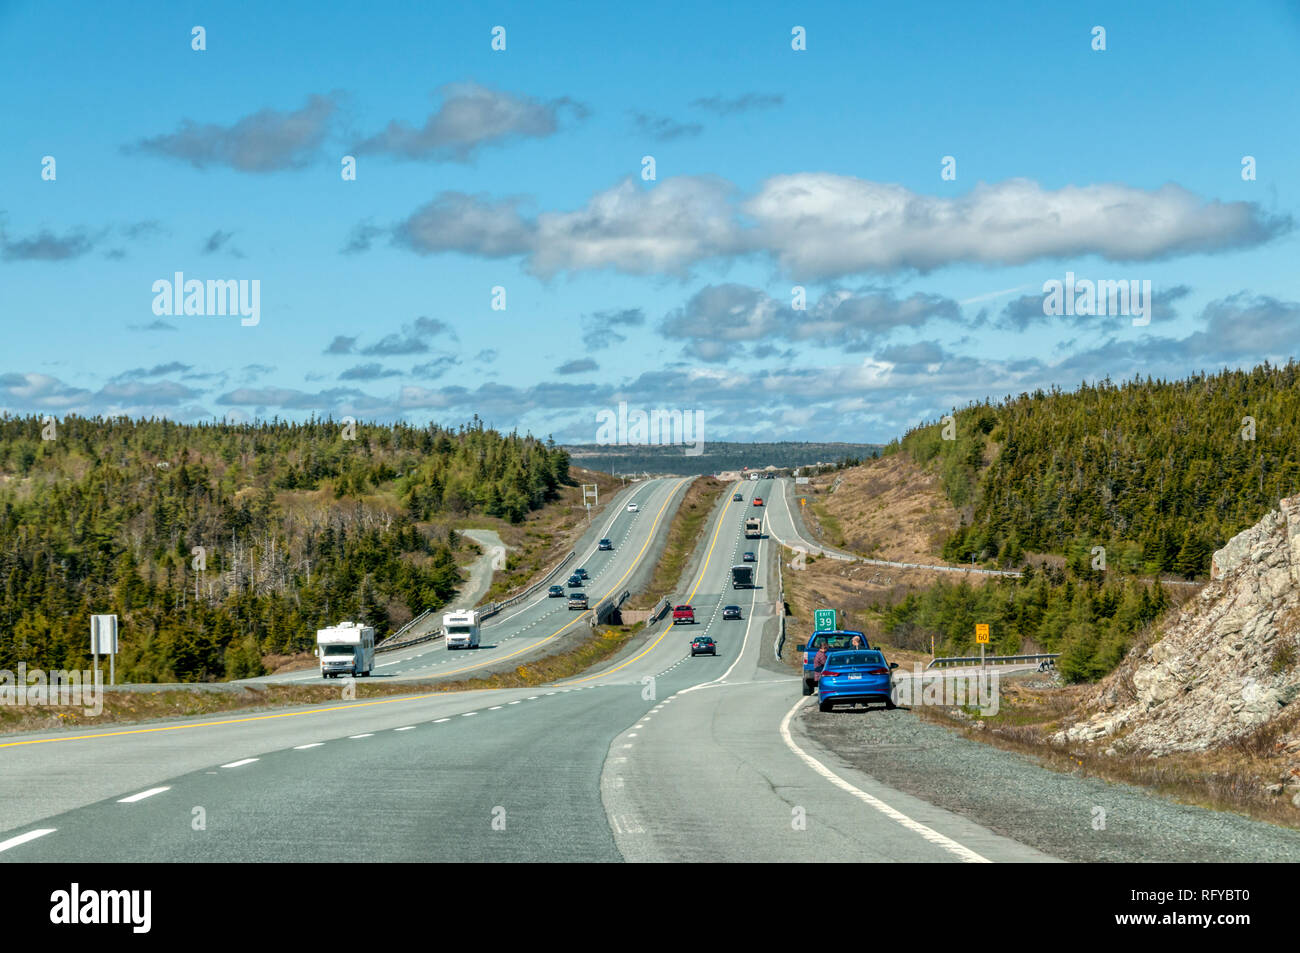 The Trans-Canada Highway in Newfoundland on east coast of Canada. It travels 4,860 miles across all provinces to west coast. Stock Photo